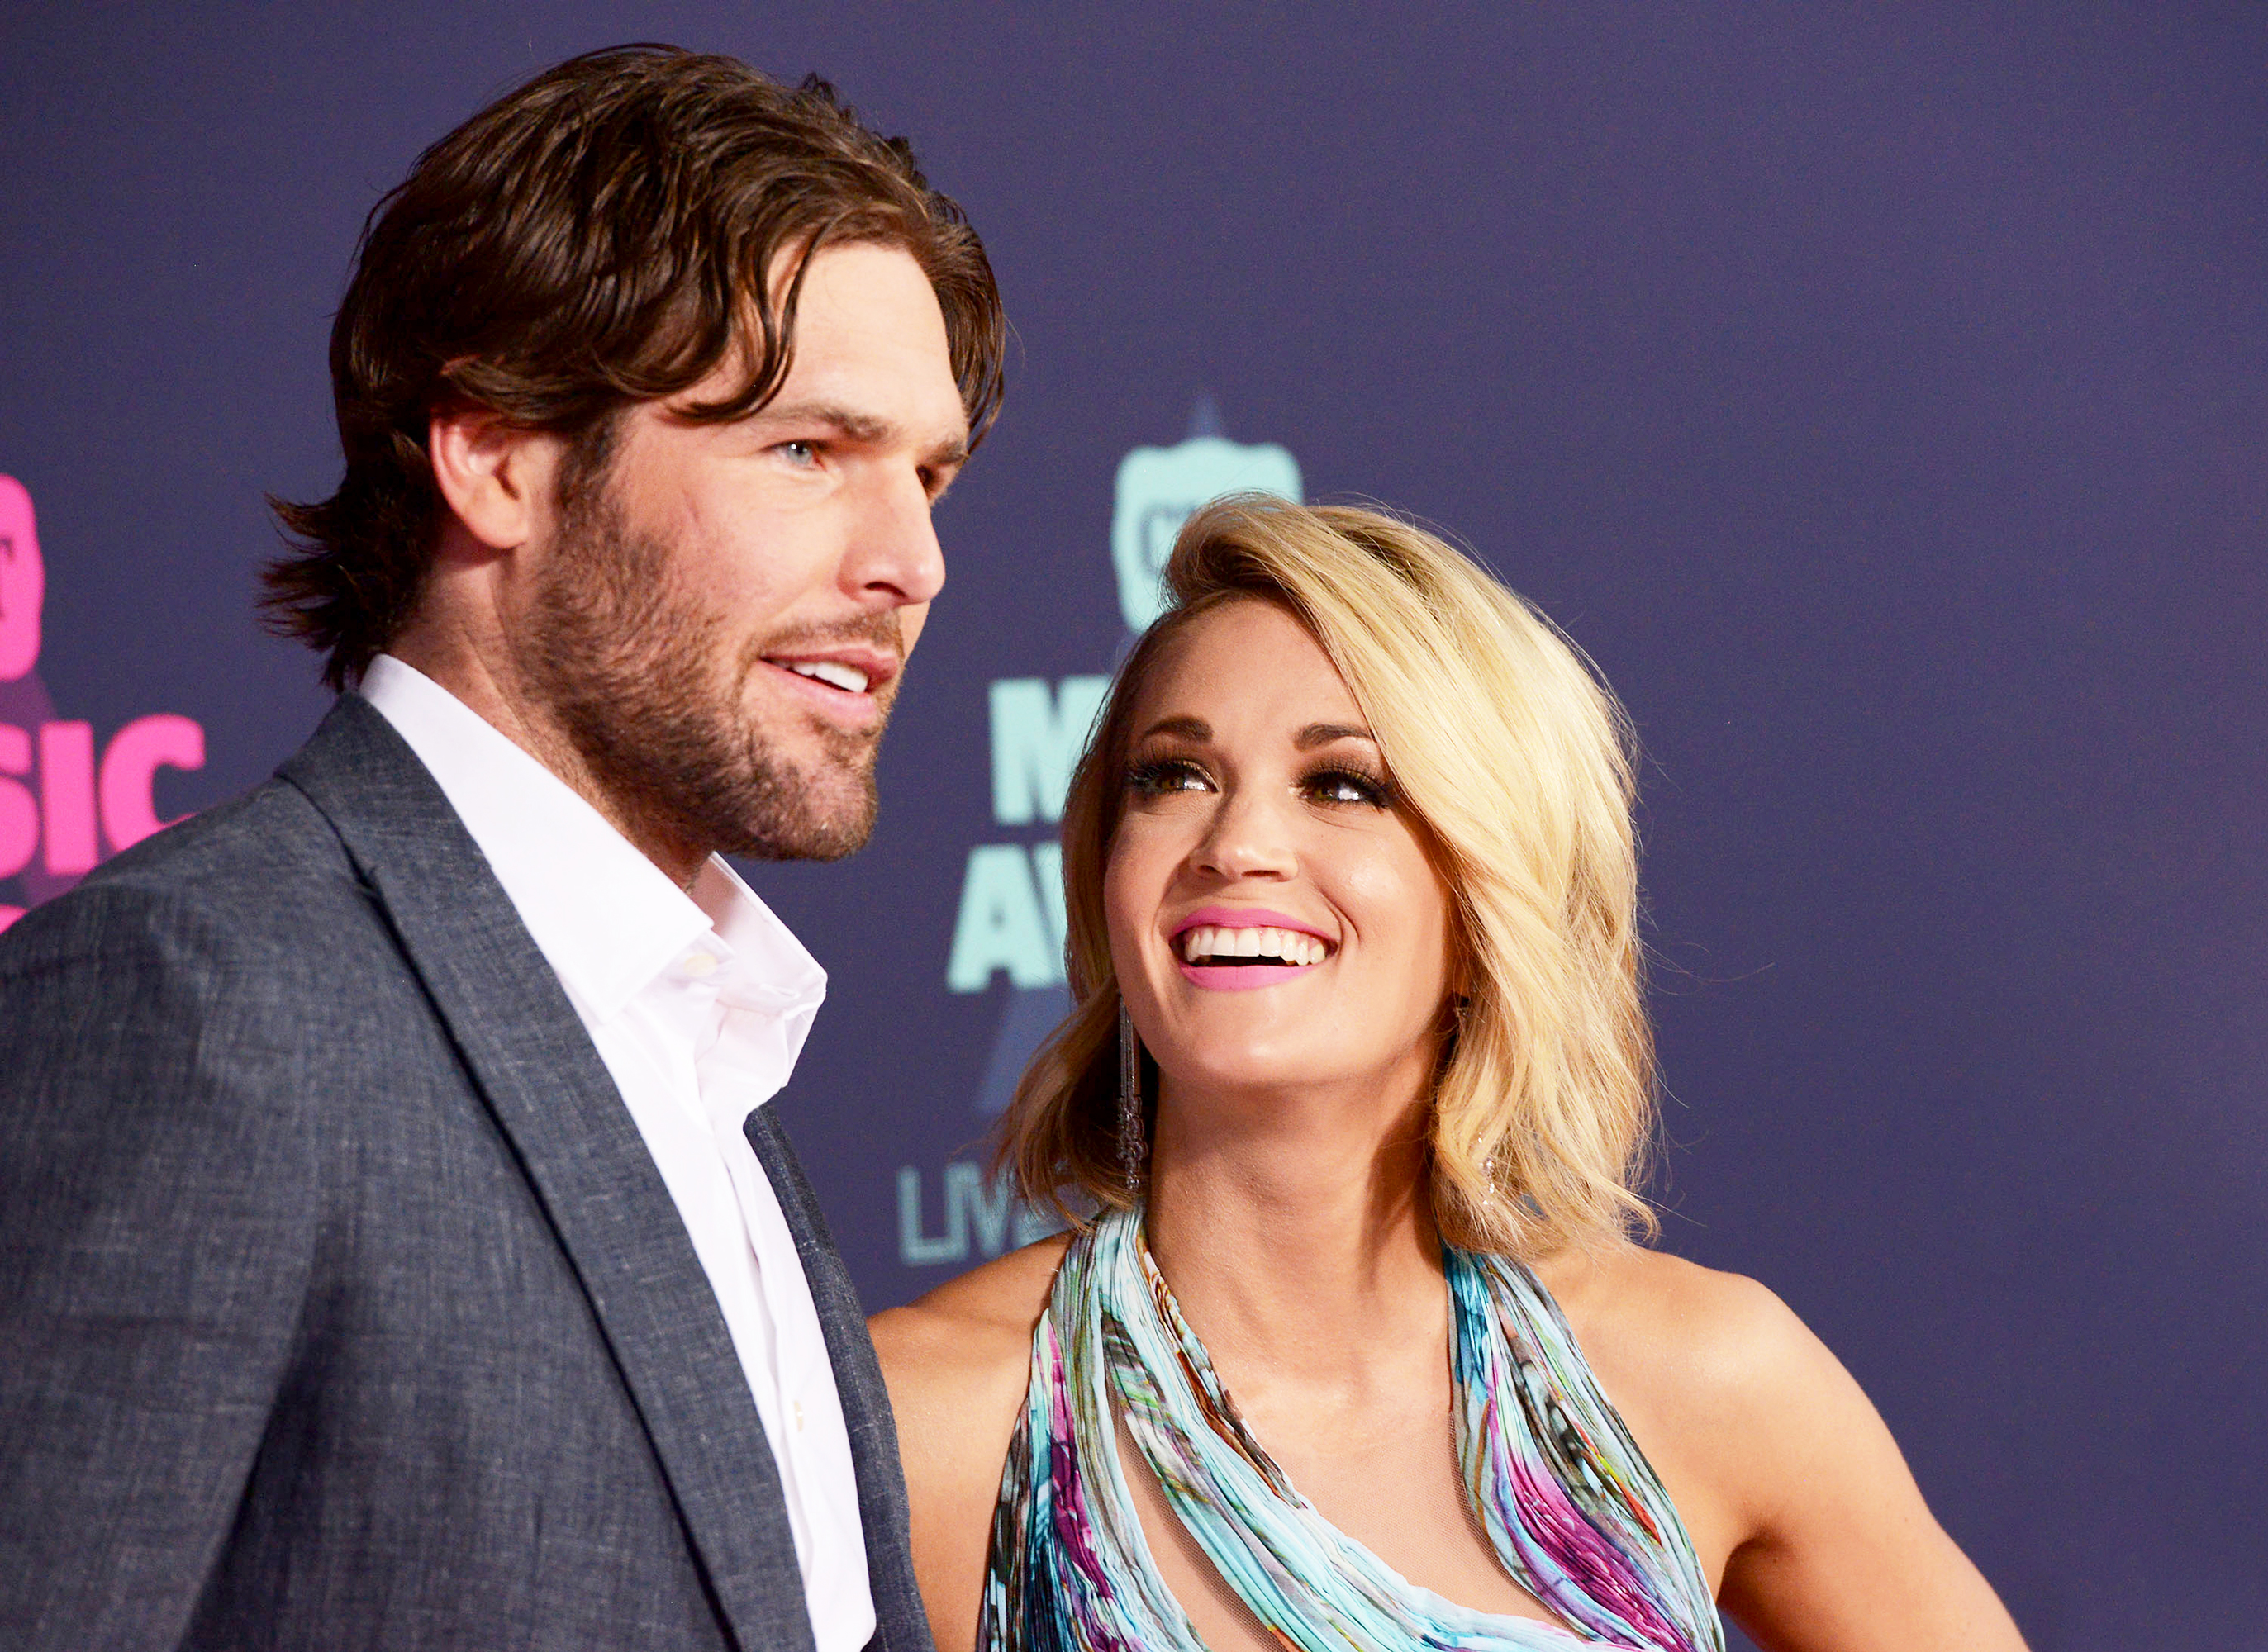 Carrie Underwood preparing for heartache involving husband Mike